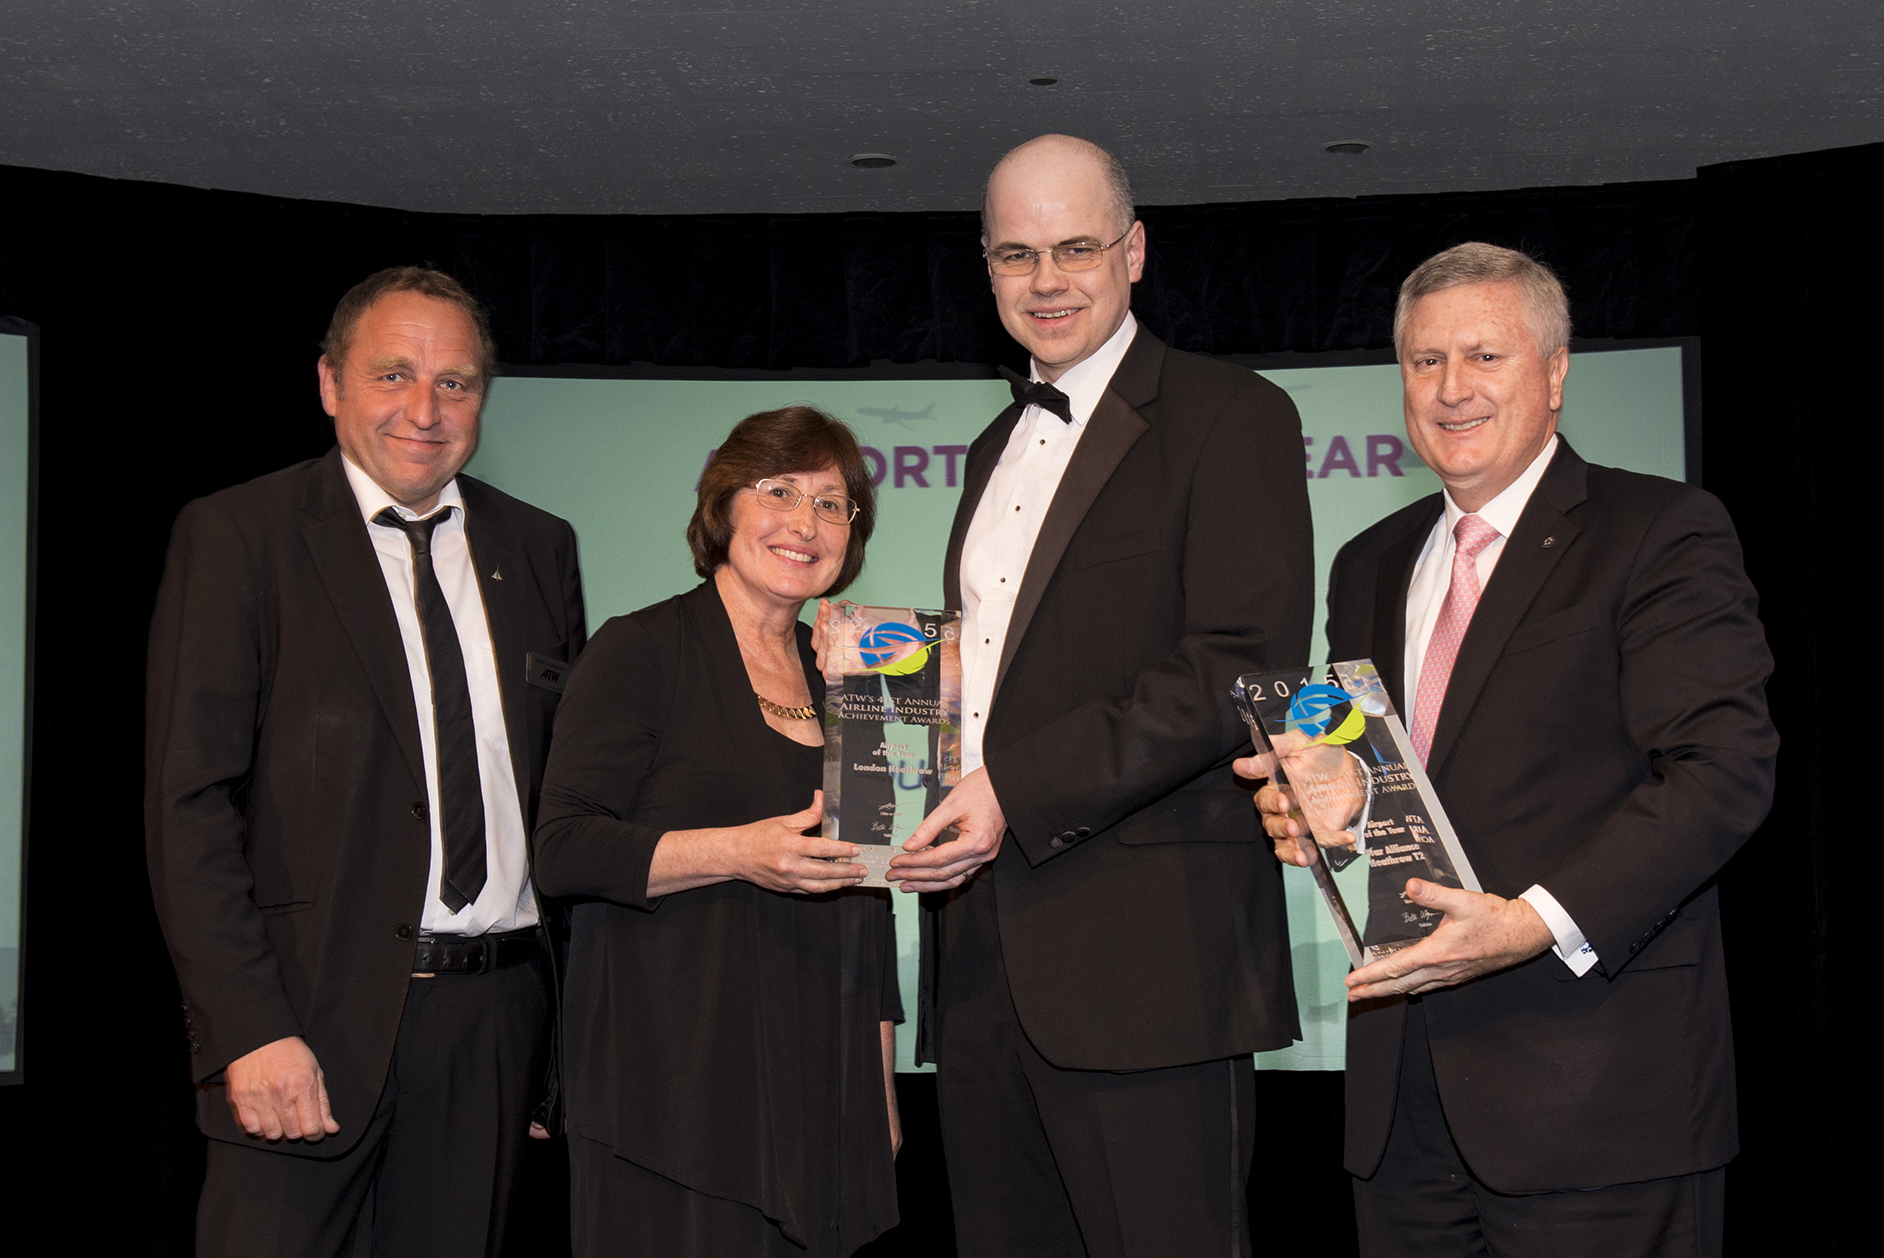 HEATHROW TERMINAL 2 │ THE QUEEN’S TERMINAL NAMED AIRPORT OF THE YEAR AT AIR TRANSPORT WORLD ANNUAL AWARDS